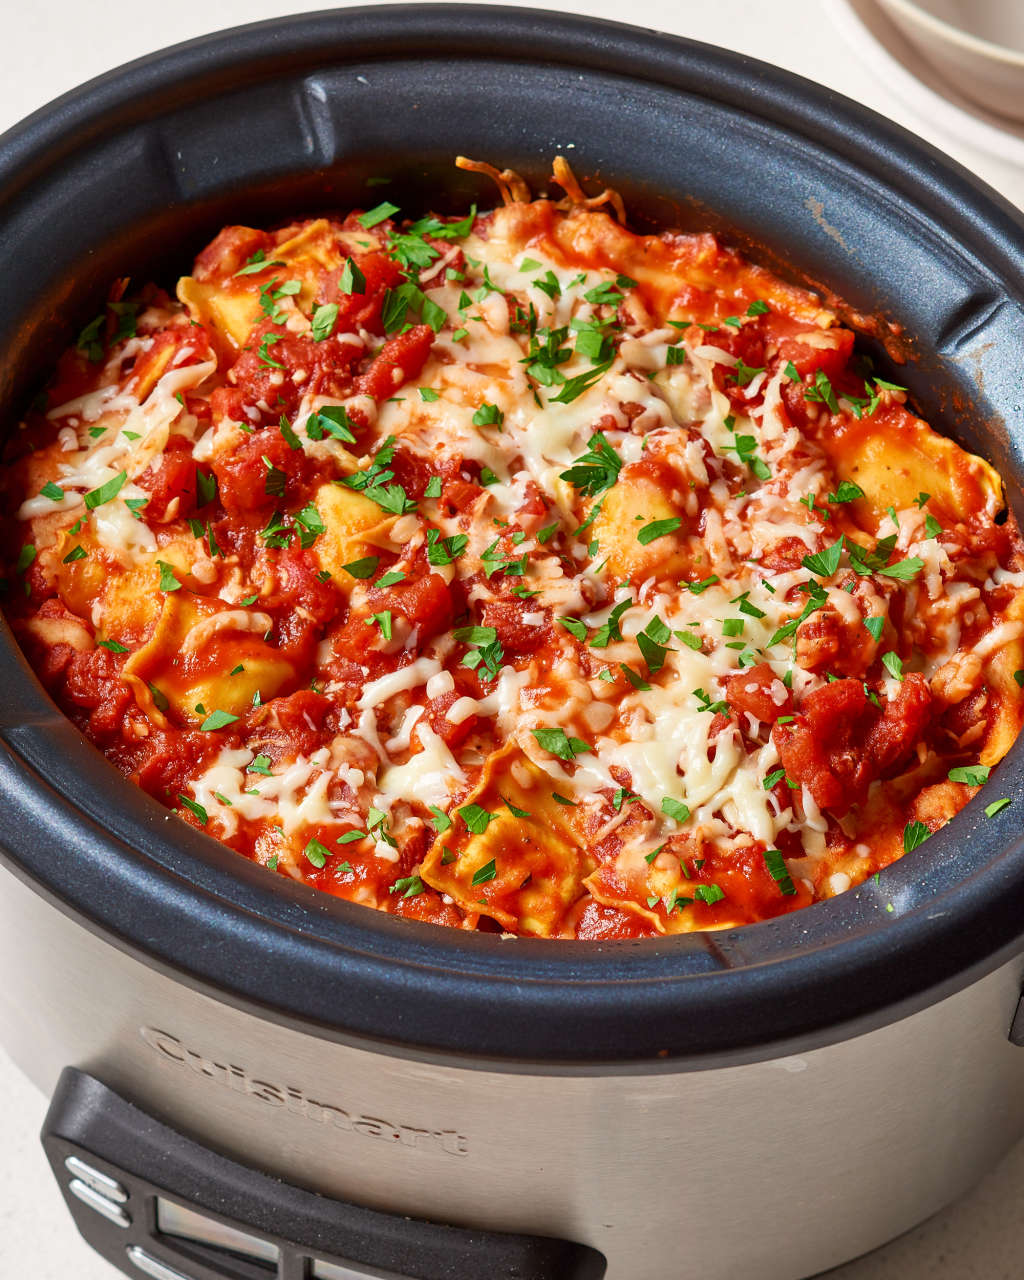 12 Slow Cooker Dinners to Make On Halloween Night | Kitchn